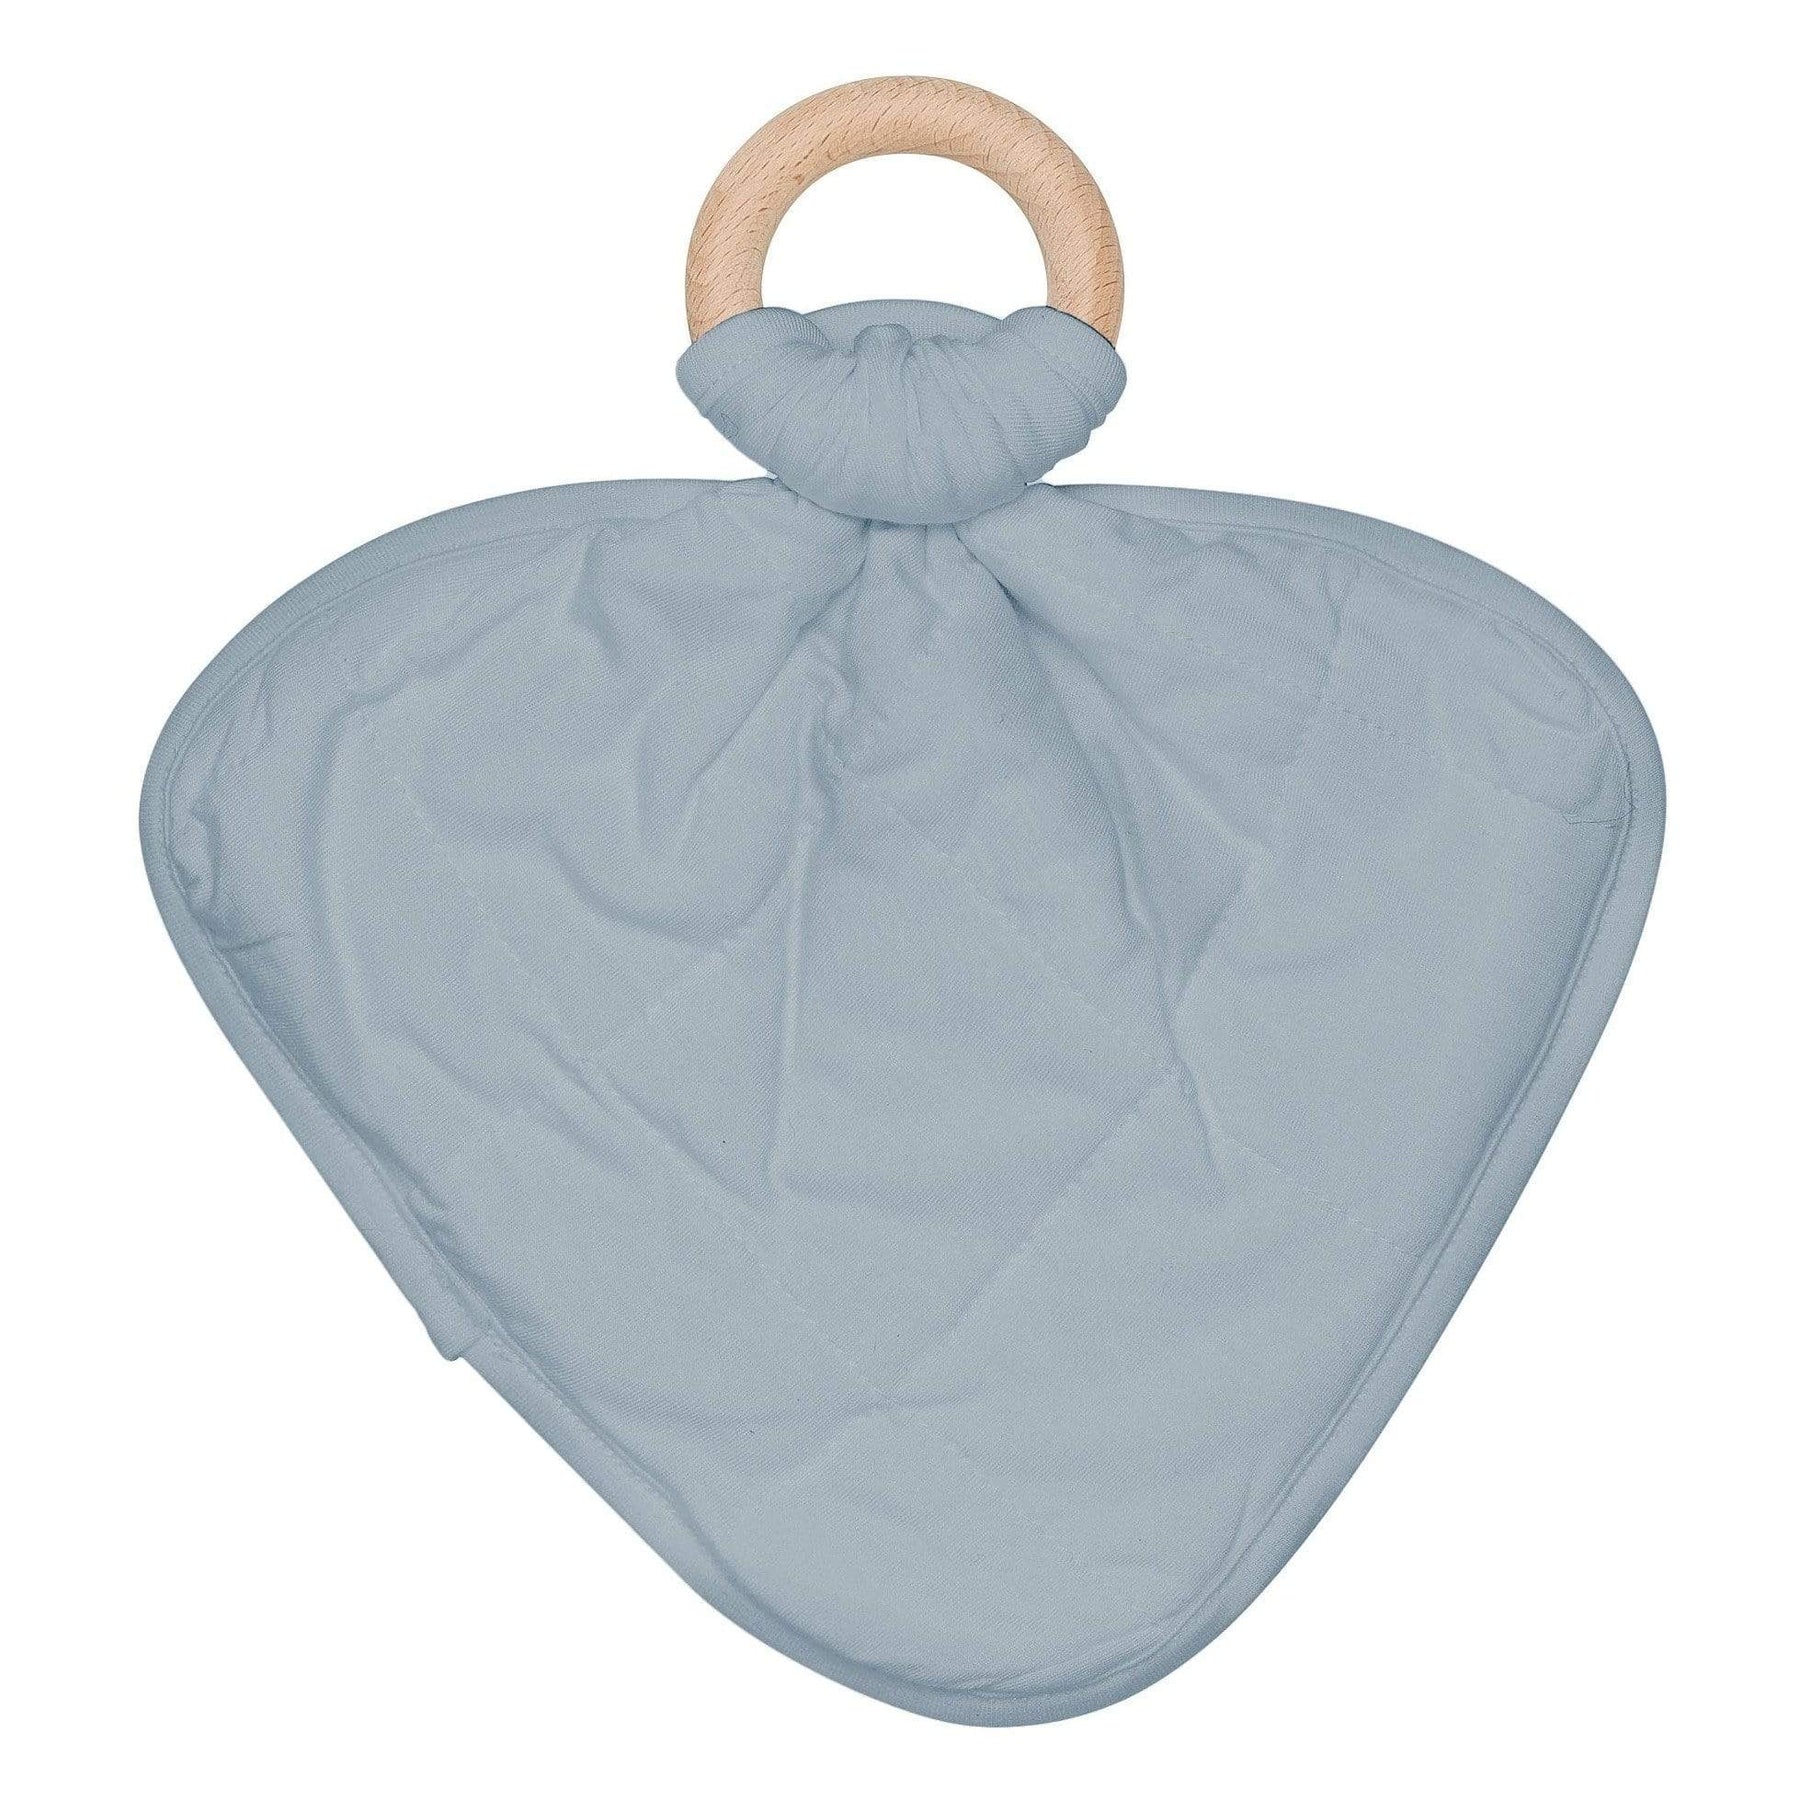 Kyte BABY Lovey Fog / Infant Lovey in Fog with Removable Teething Ring